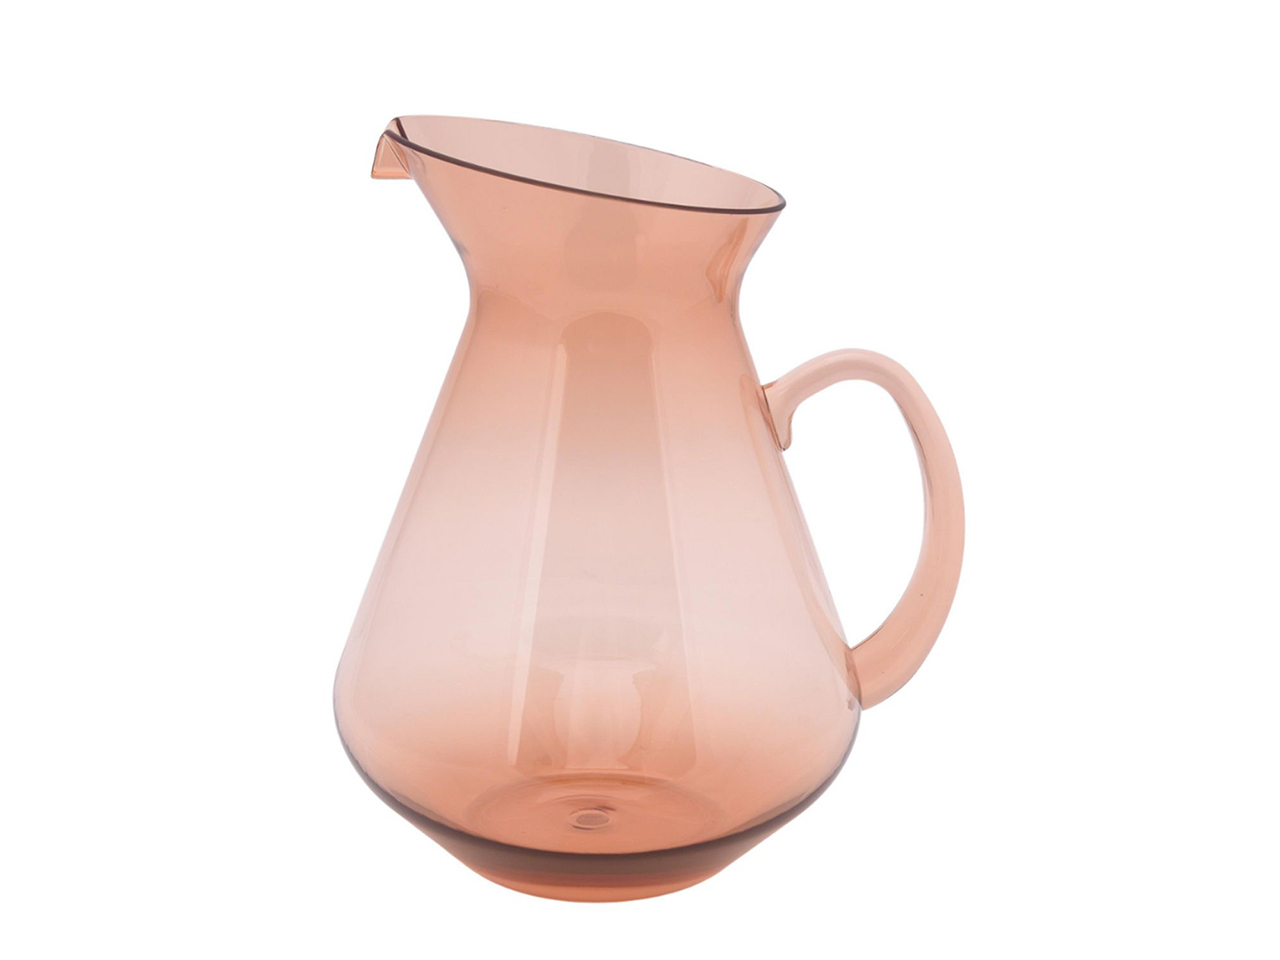 A pink plastic pitcher from HomeTrends for summer outdoor entertaining.